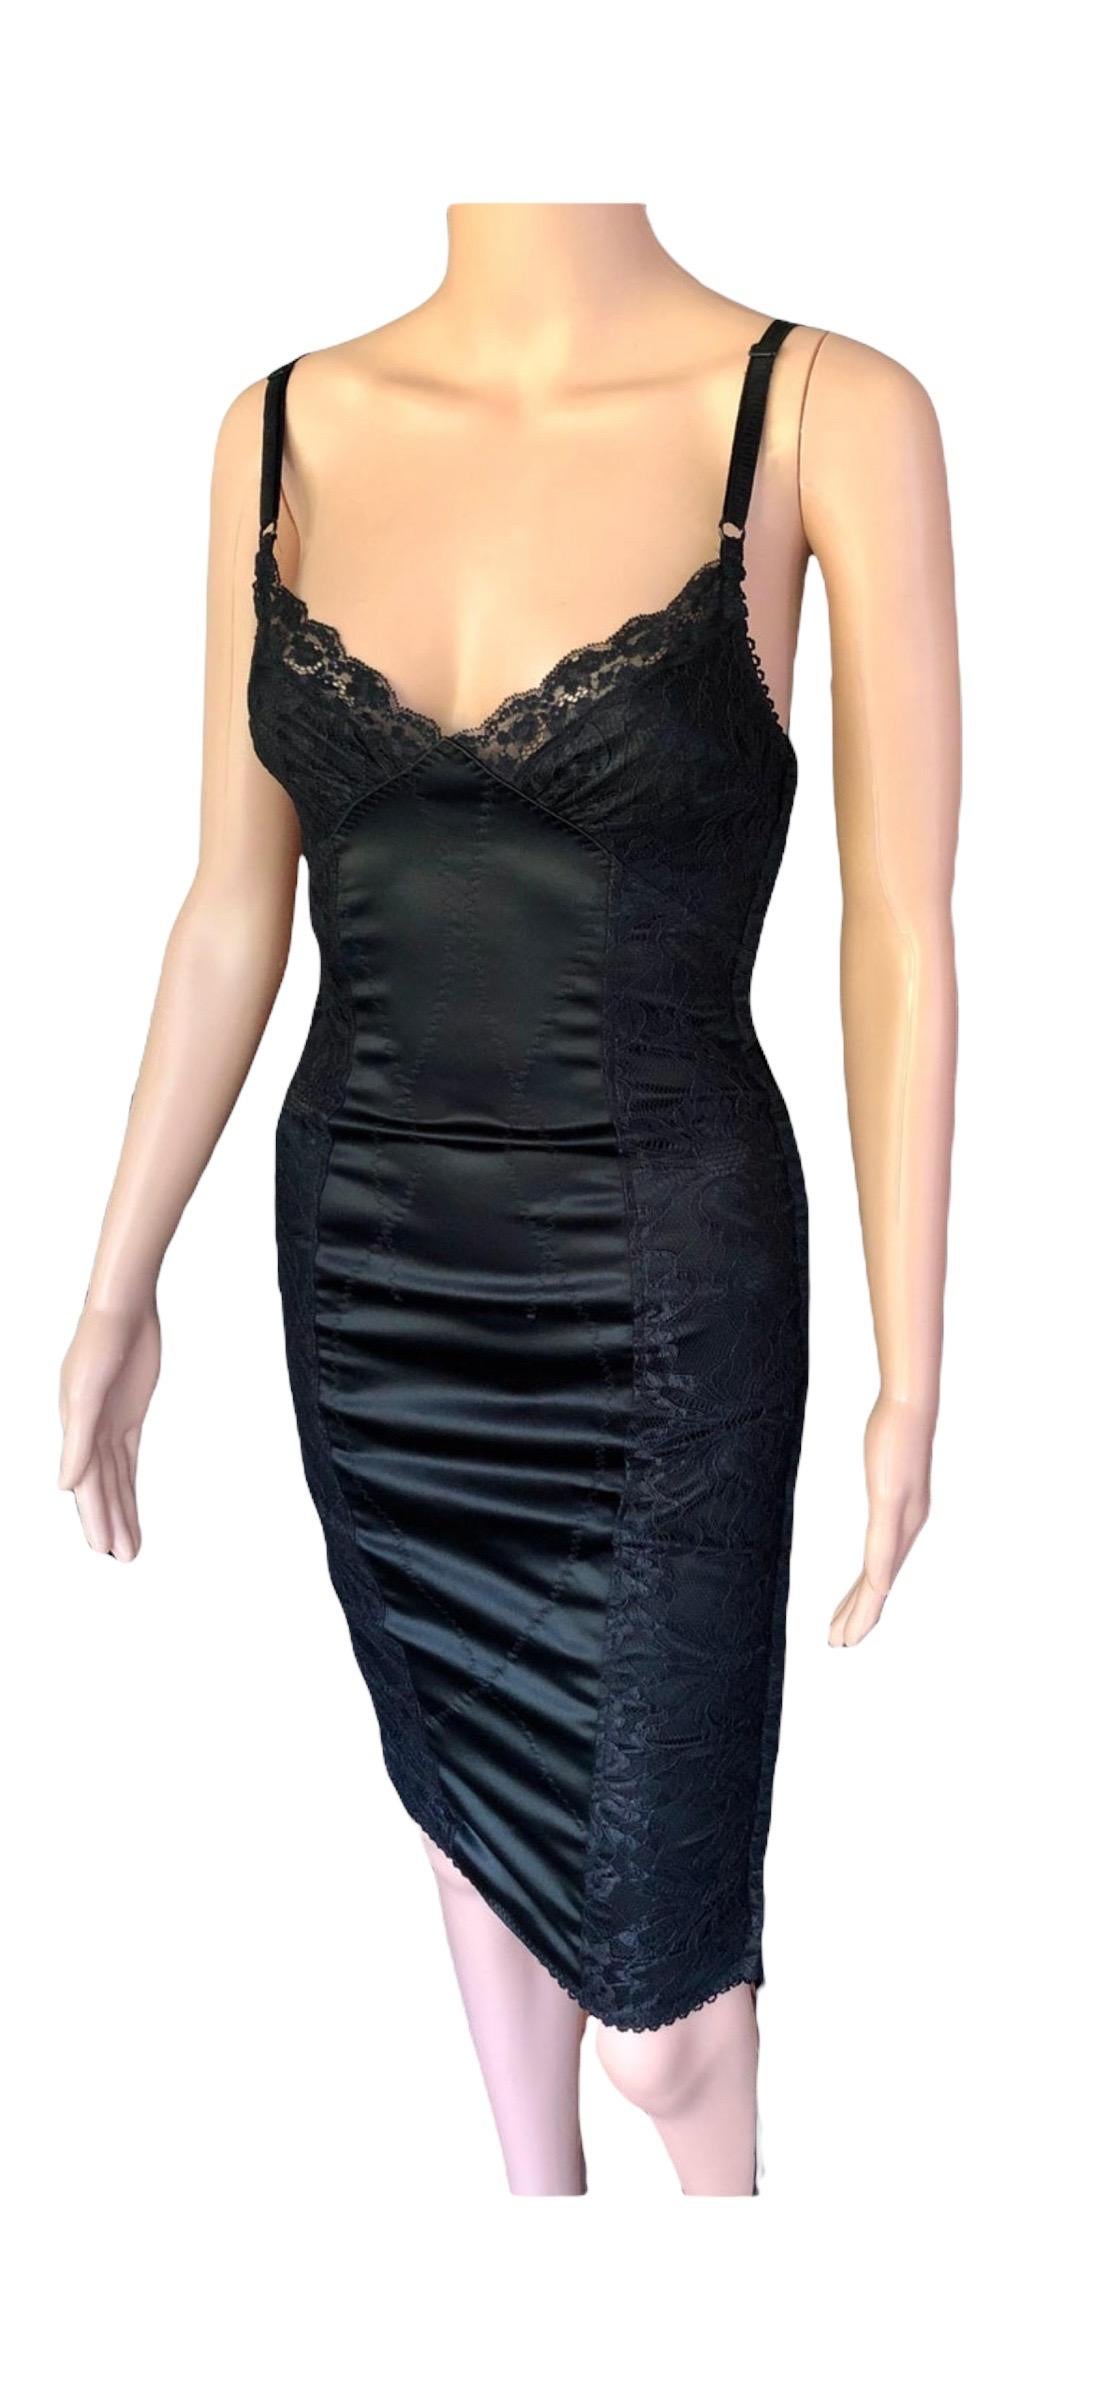 D&G by Dolce & Gabbana Lace Up Bodycon Black Dress For Sale 5